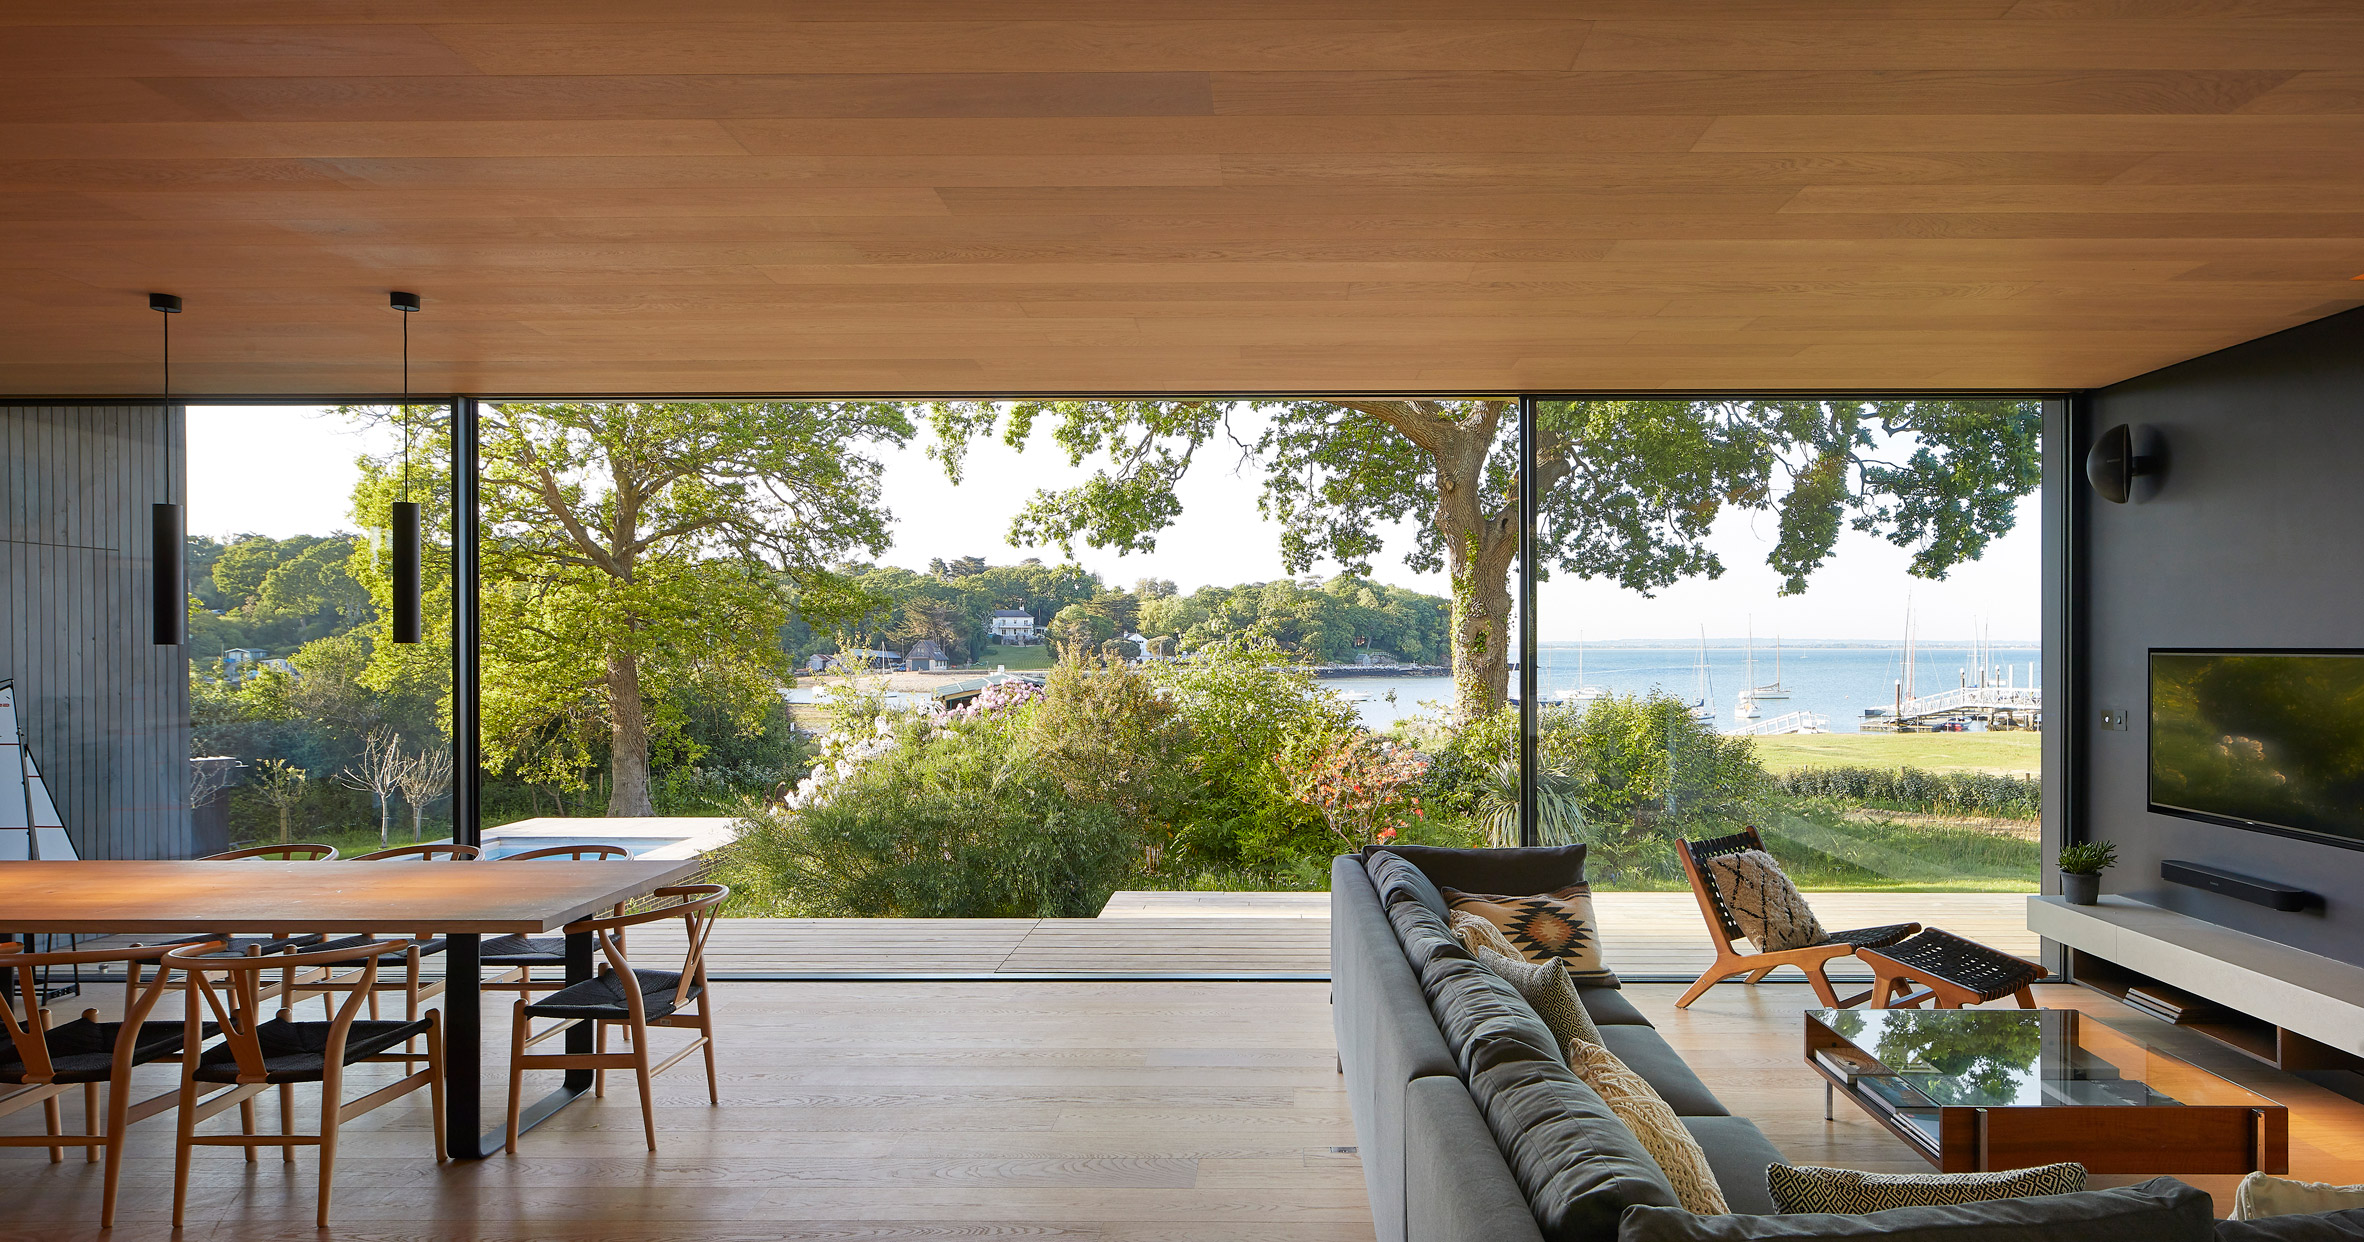 Island Rest holiday home in Isle of Wight designed by Ström Architects